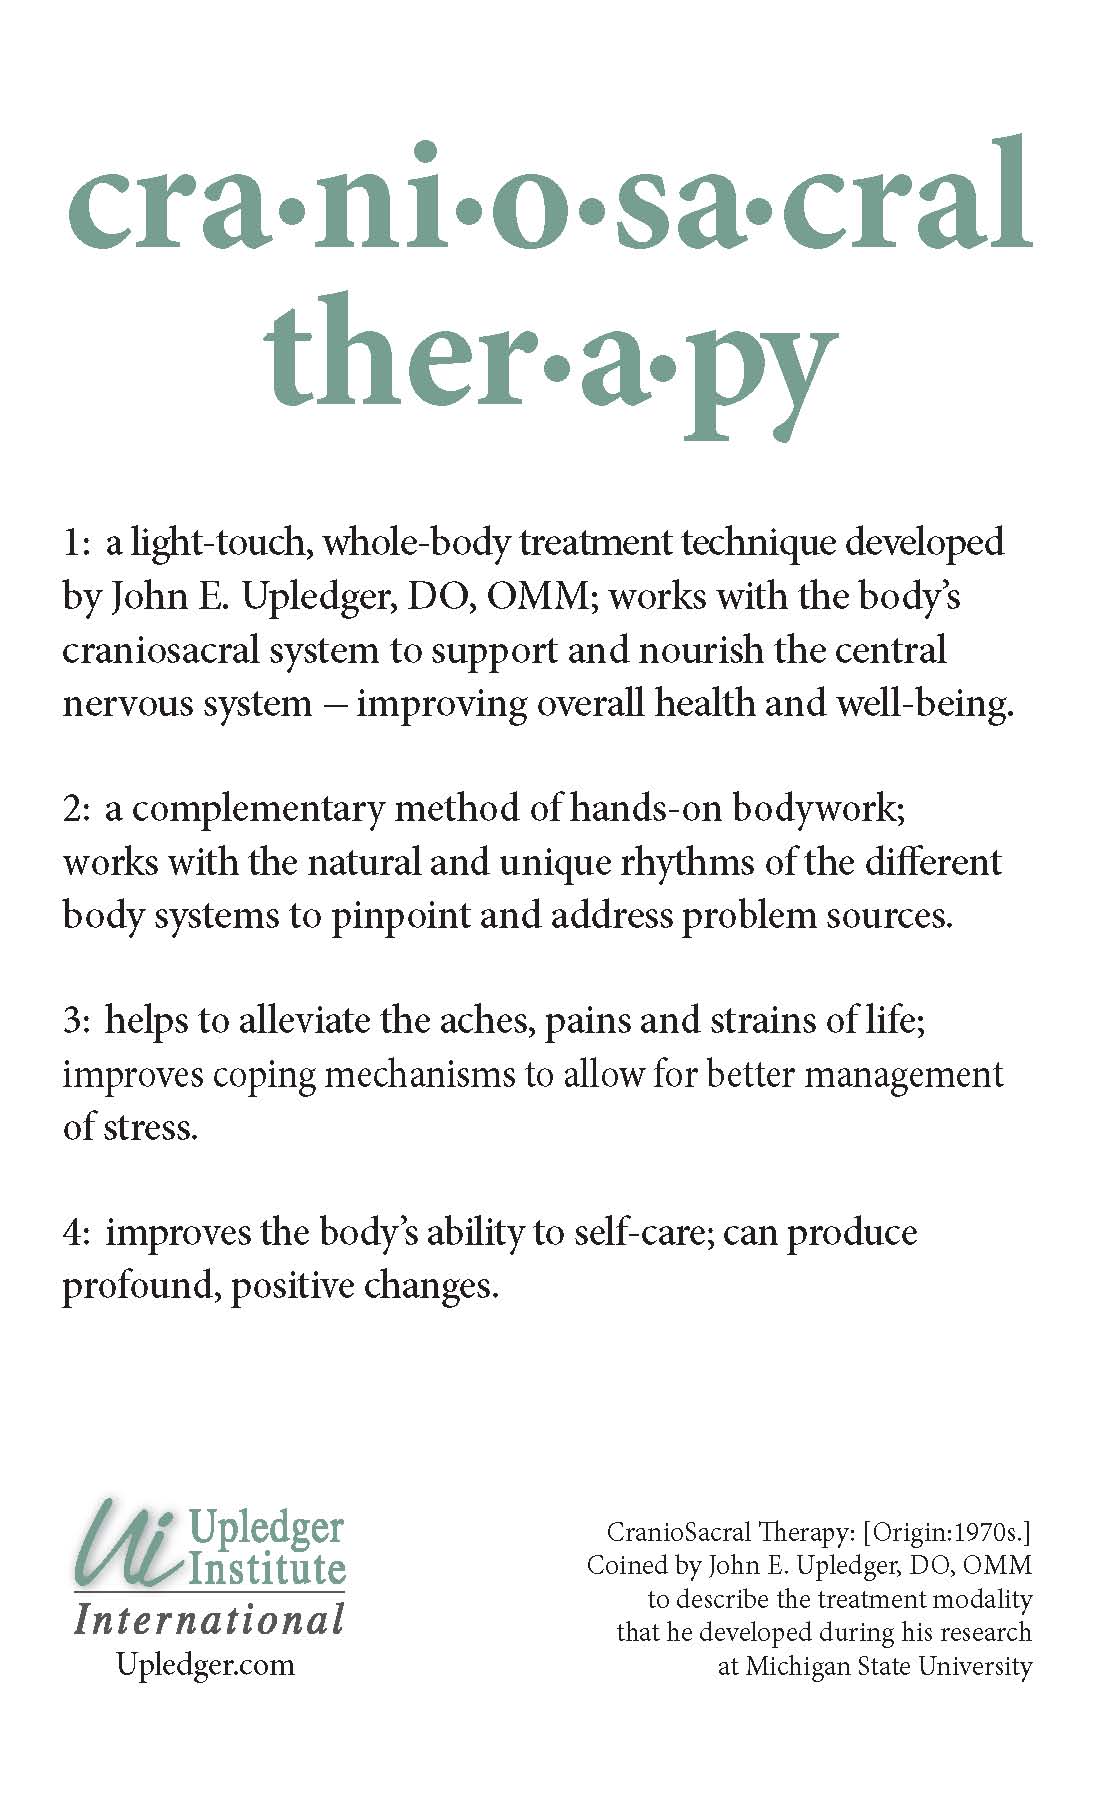 CranioSacral Therapy Definition Poster